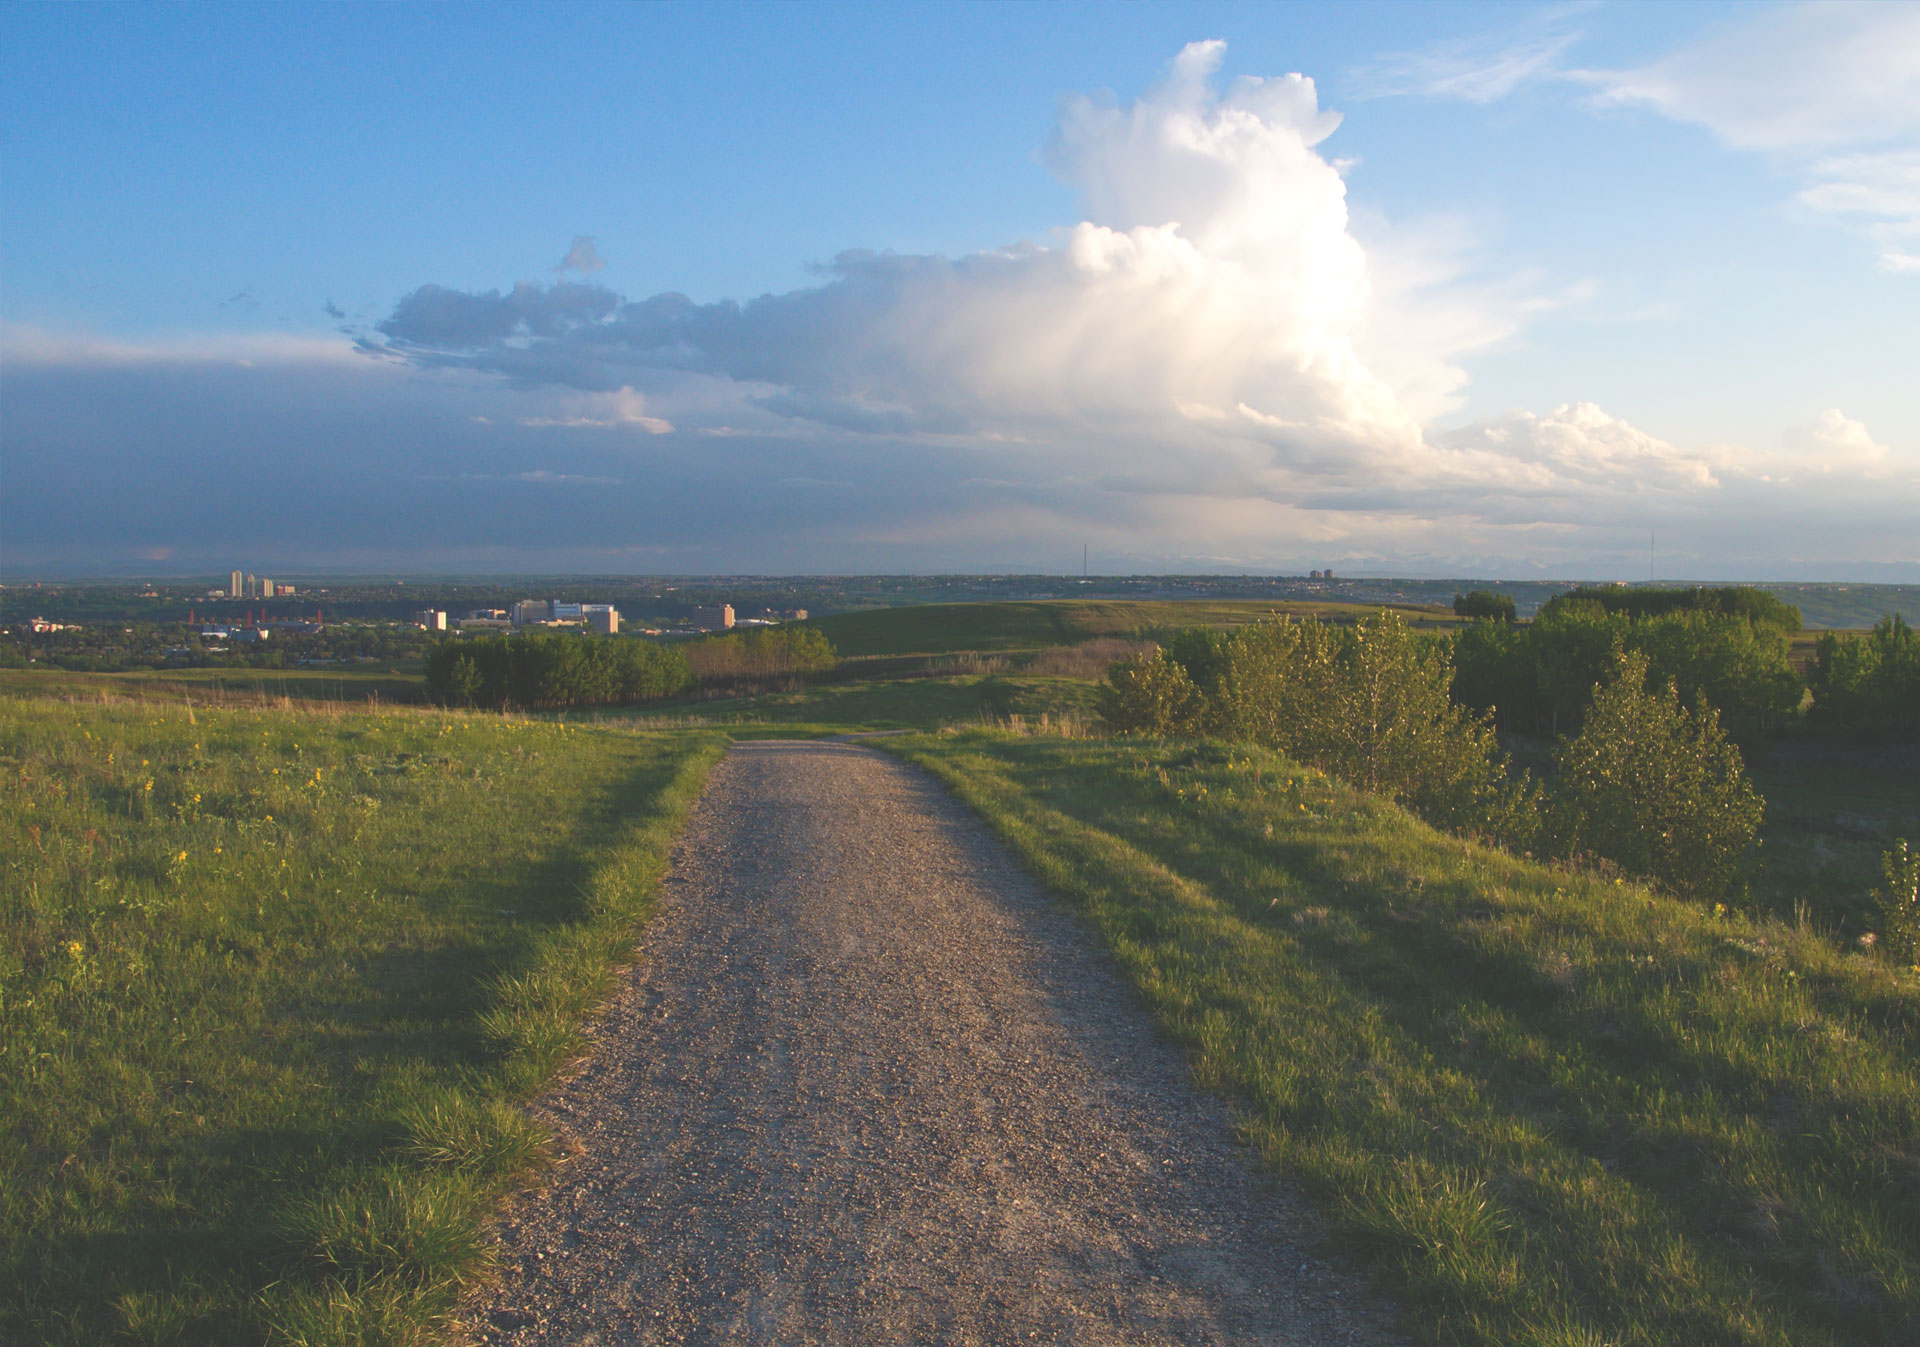 Nose Hill Park provides great views of the city